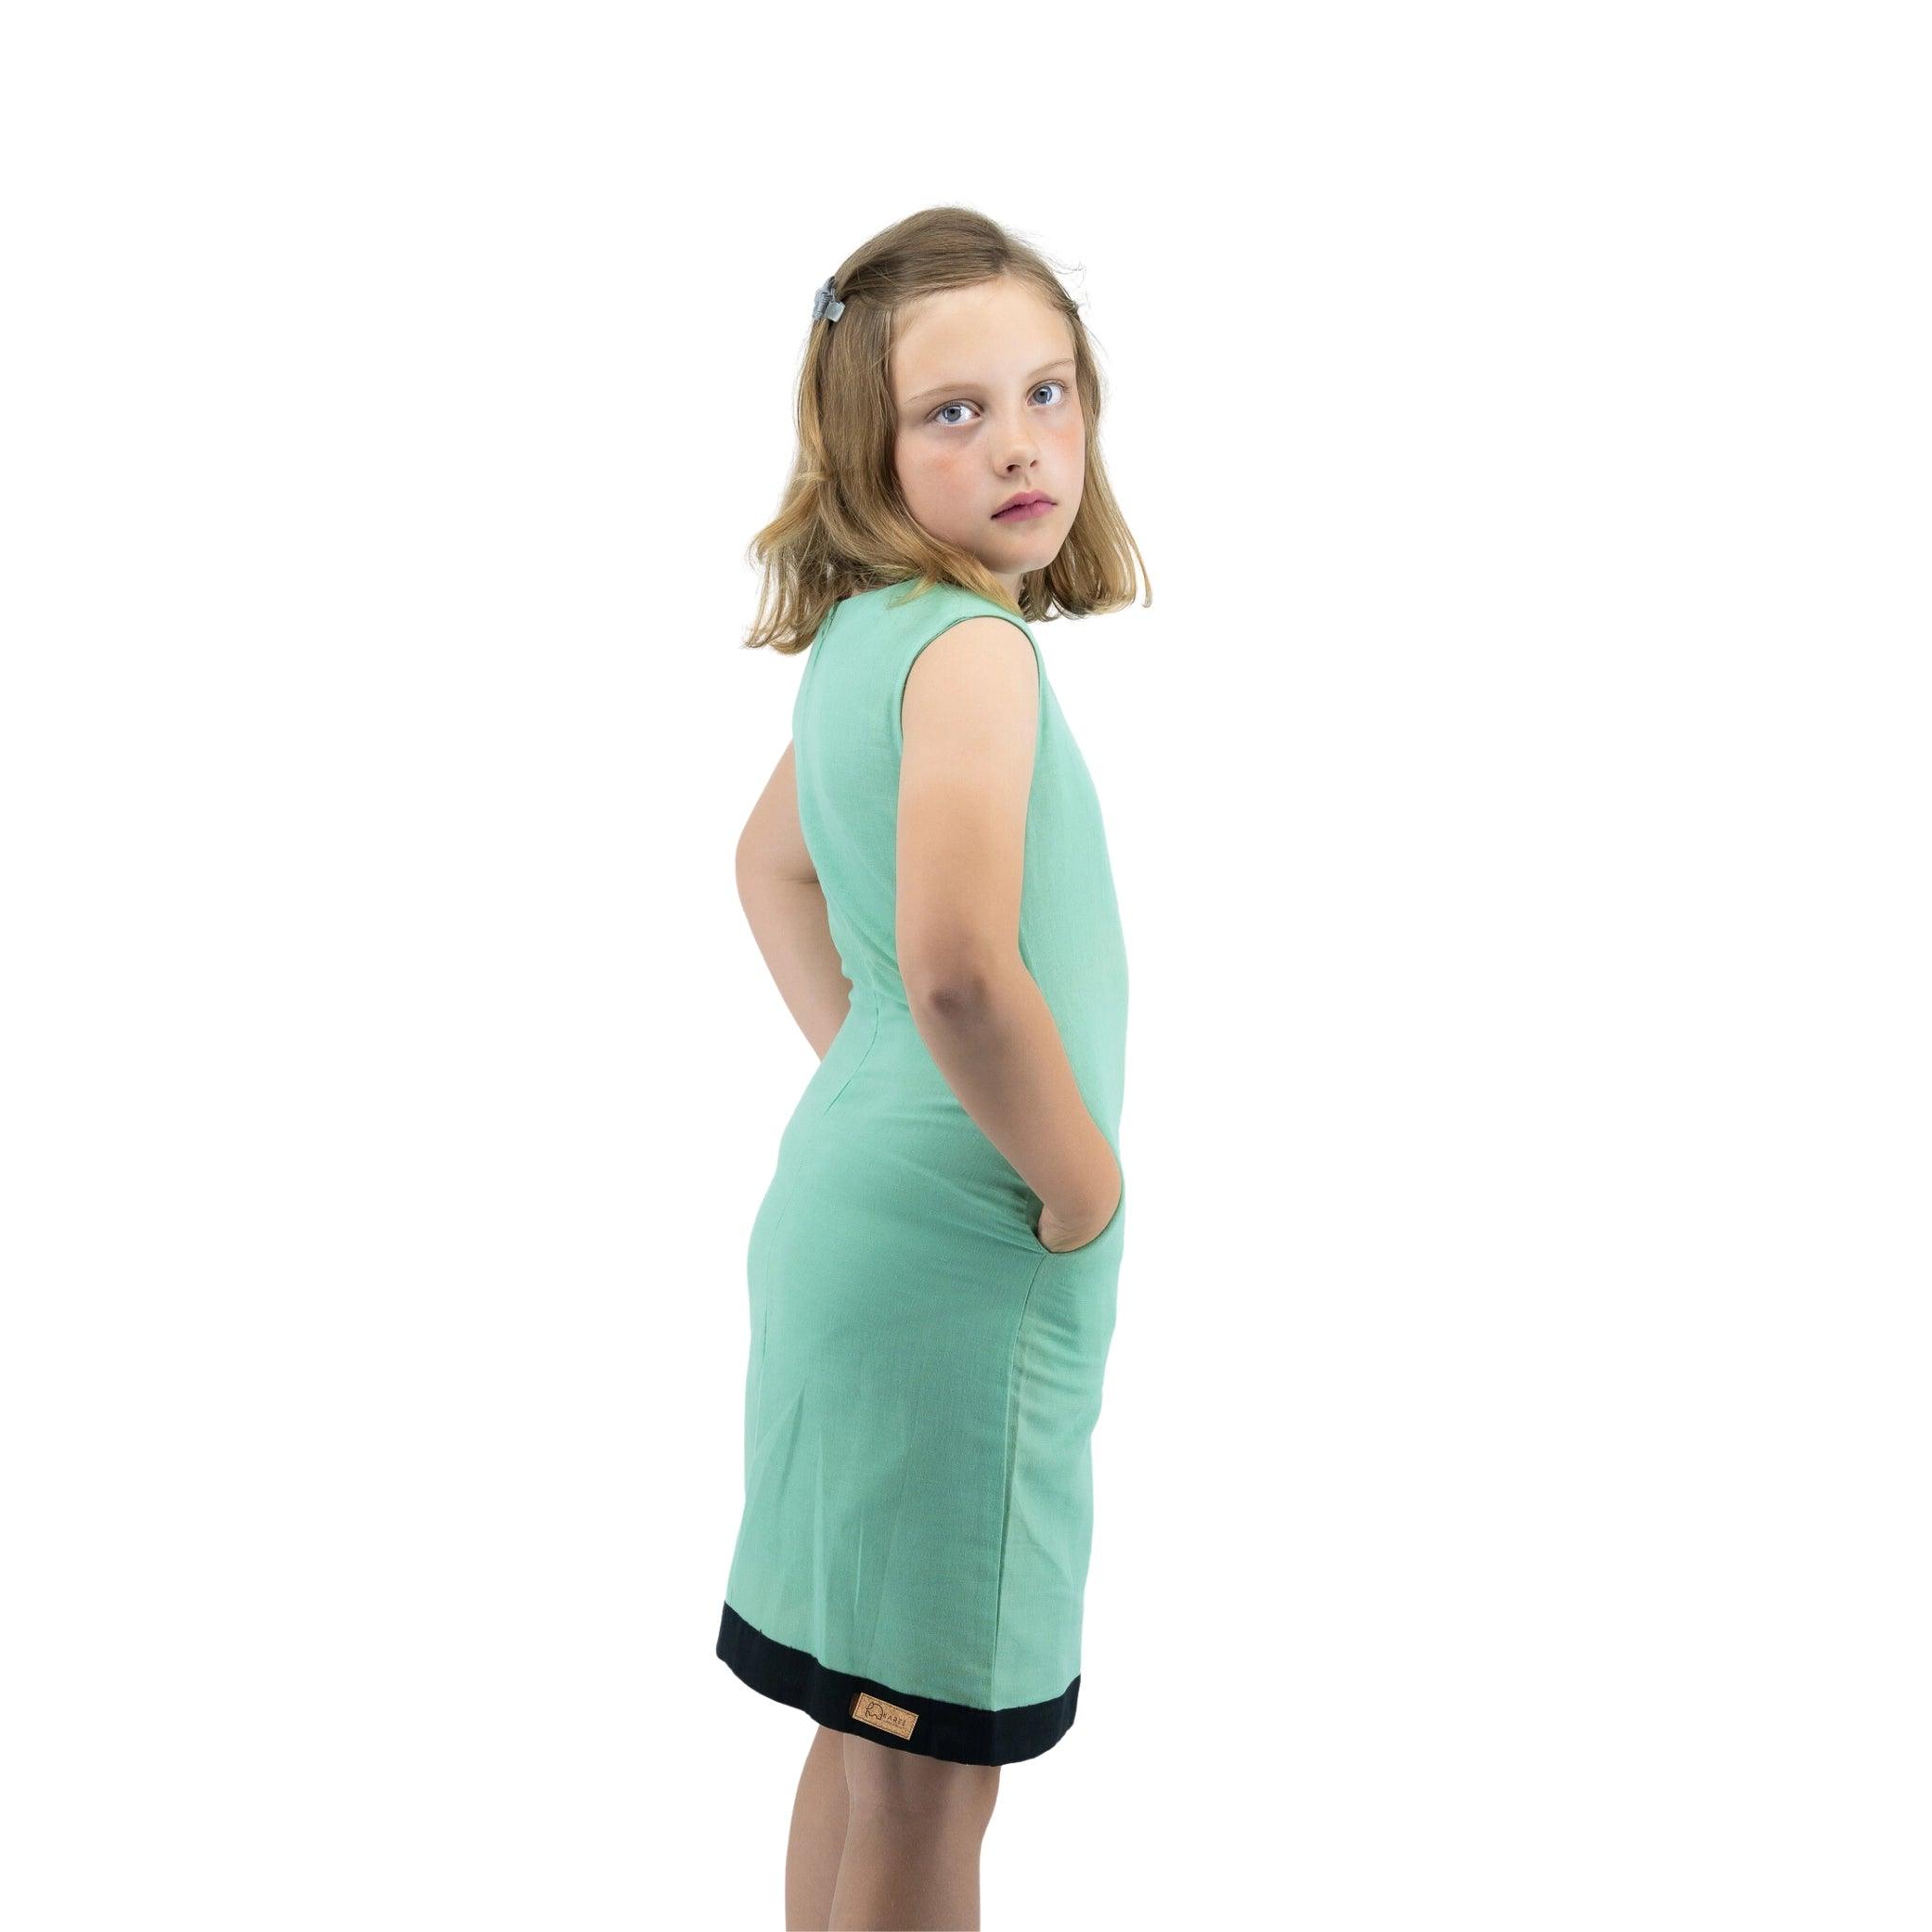 Young girl in a Karee Linen Cotton Round Neck Frock for Kids in Neptune Green looking over her shoulder, standing against a white background.